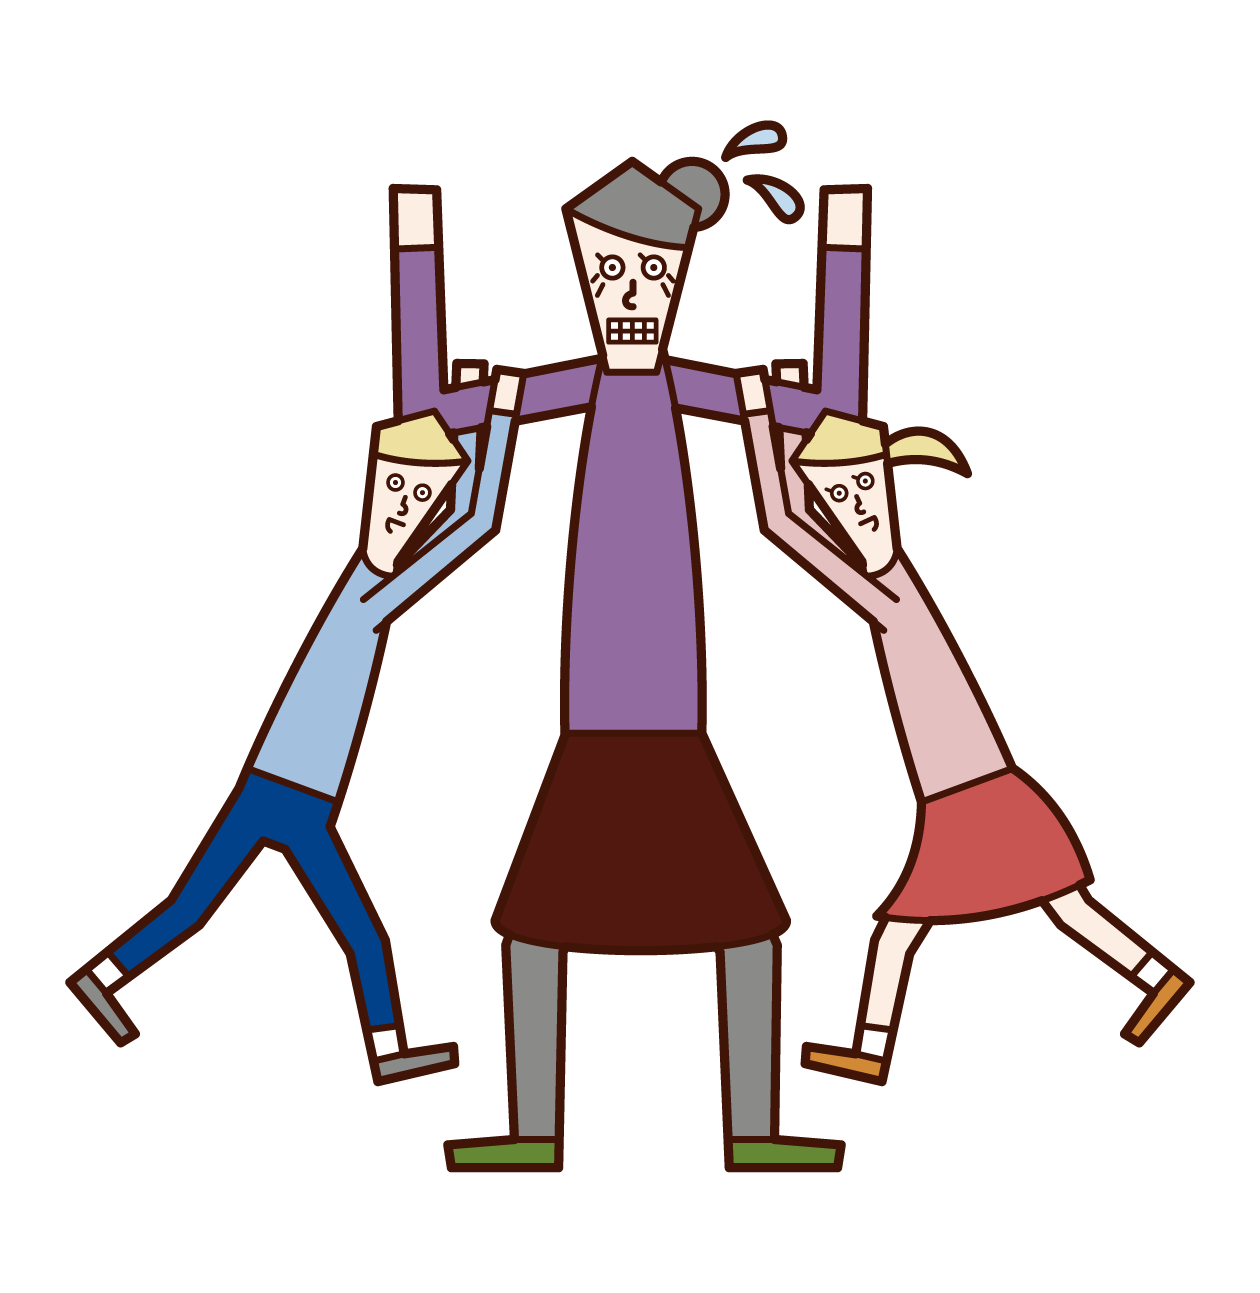 Illustration of an old man (woman) playing with children